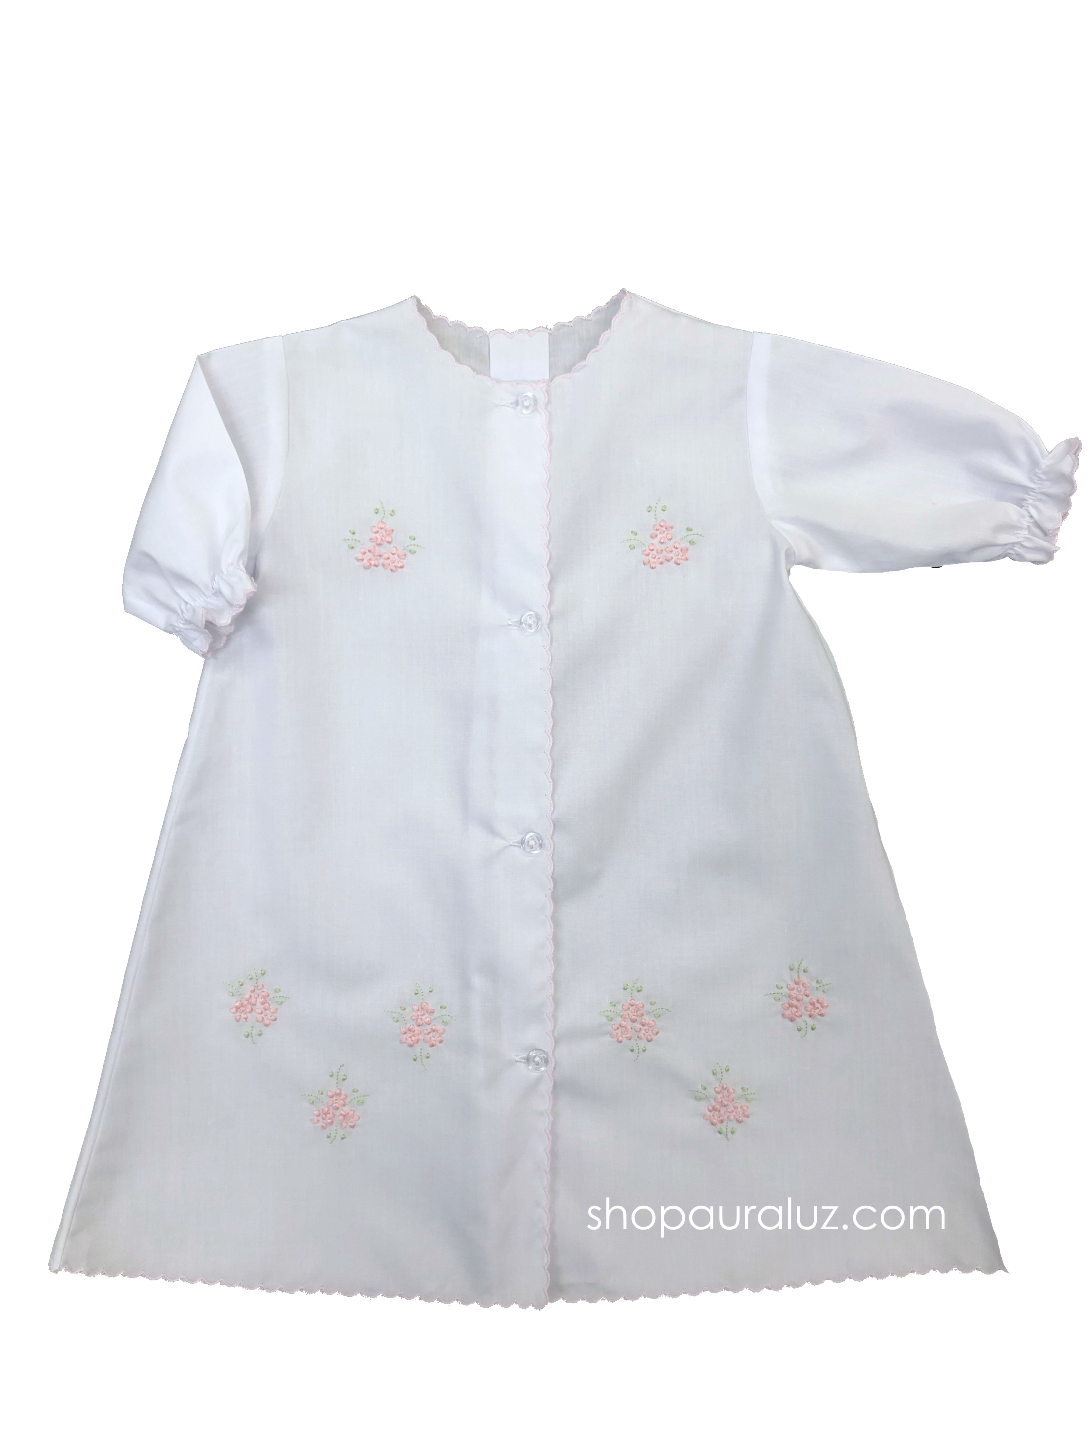 Auraluz Day Gown, l/s..White with pink scallops and embroidered flowers